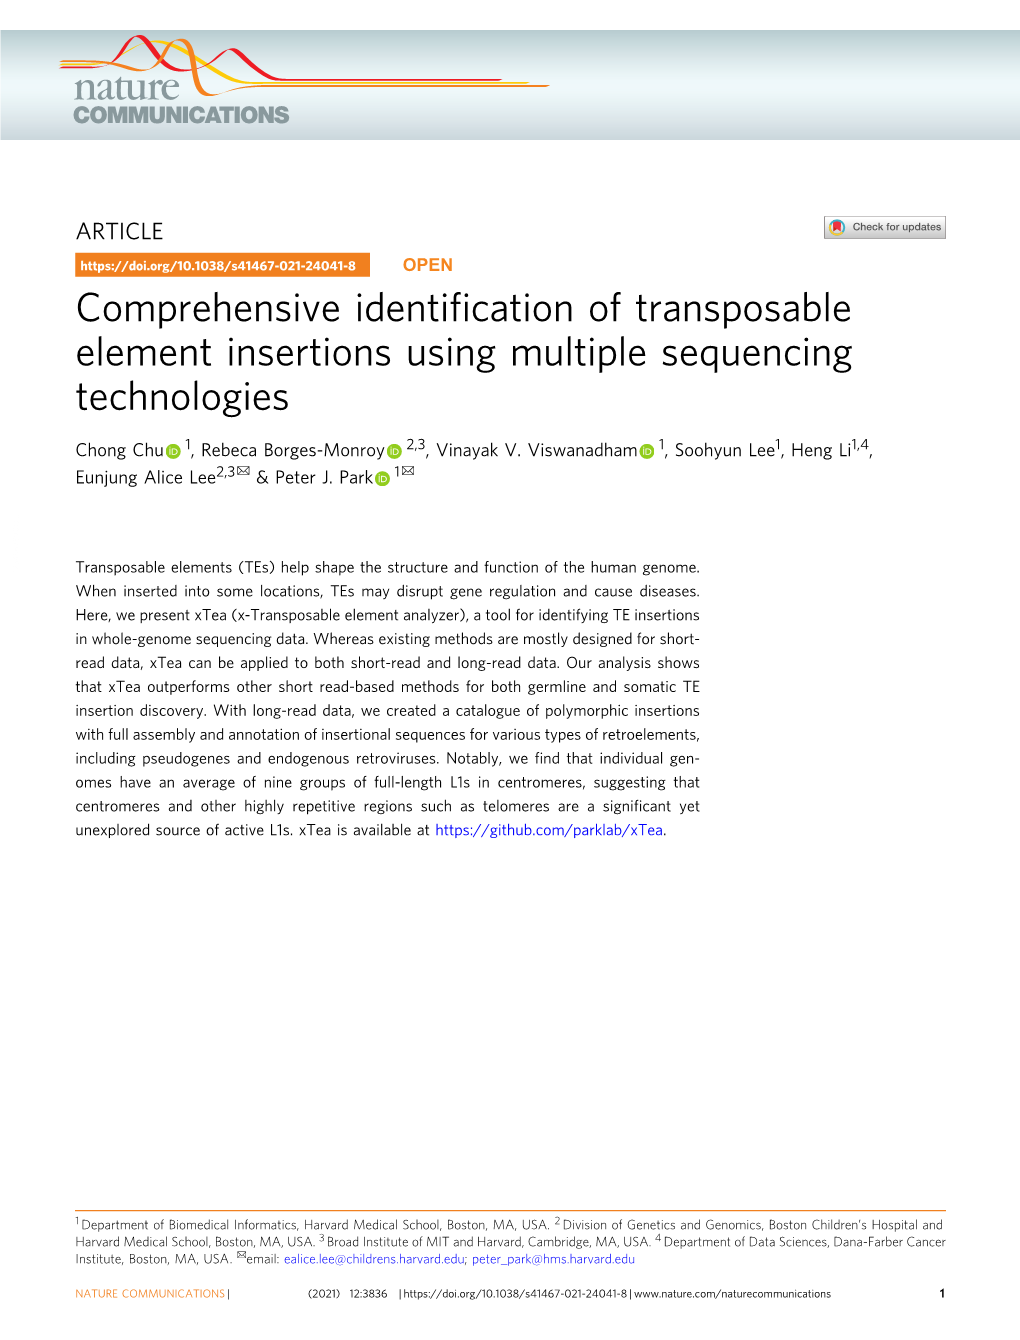 Comprehensive Identification of Transposable Element Insertions